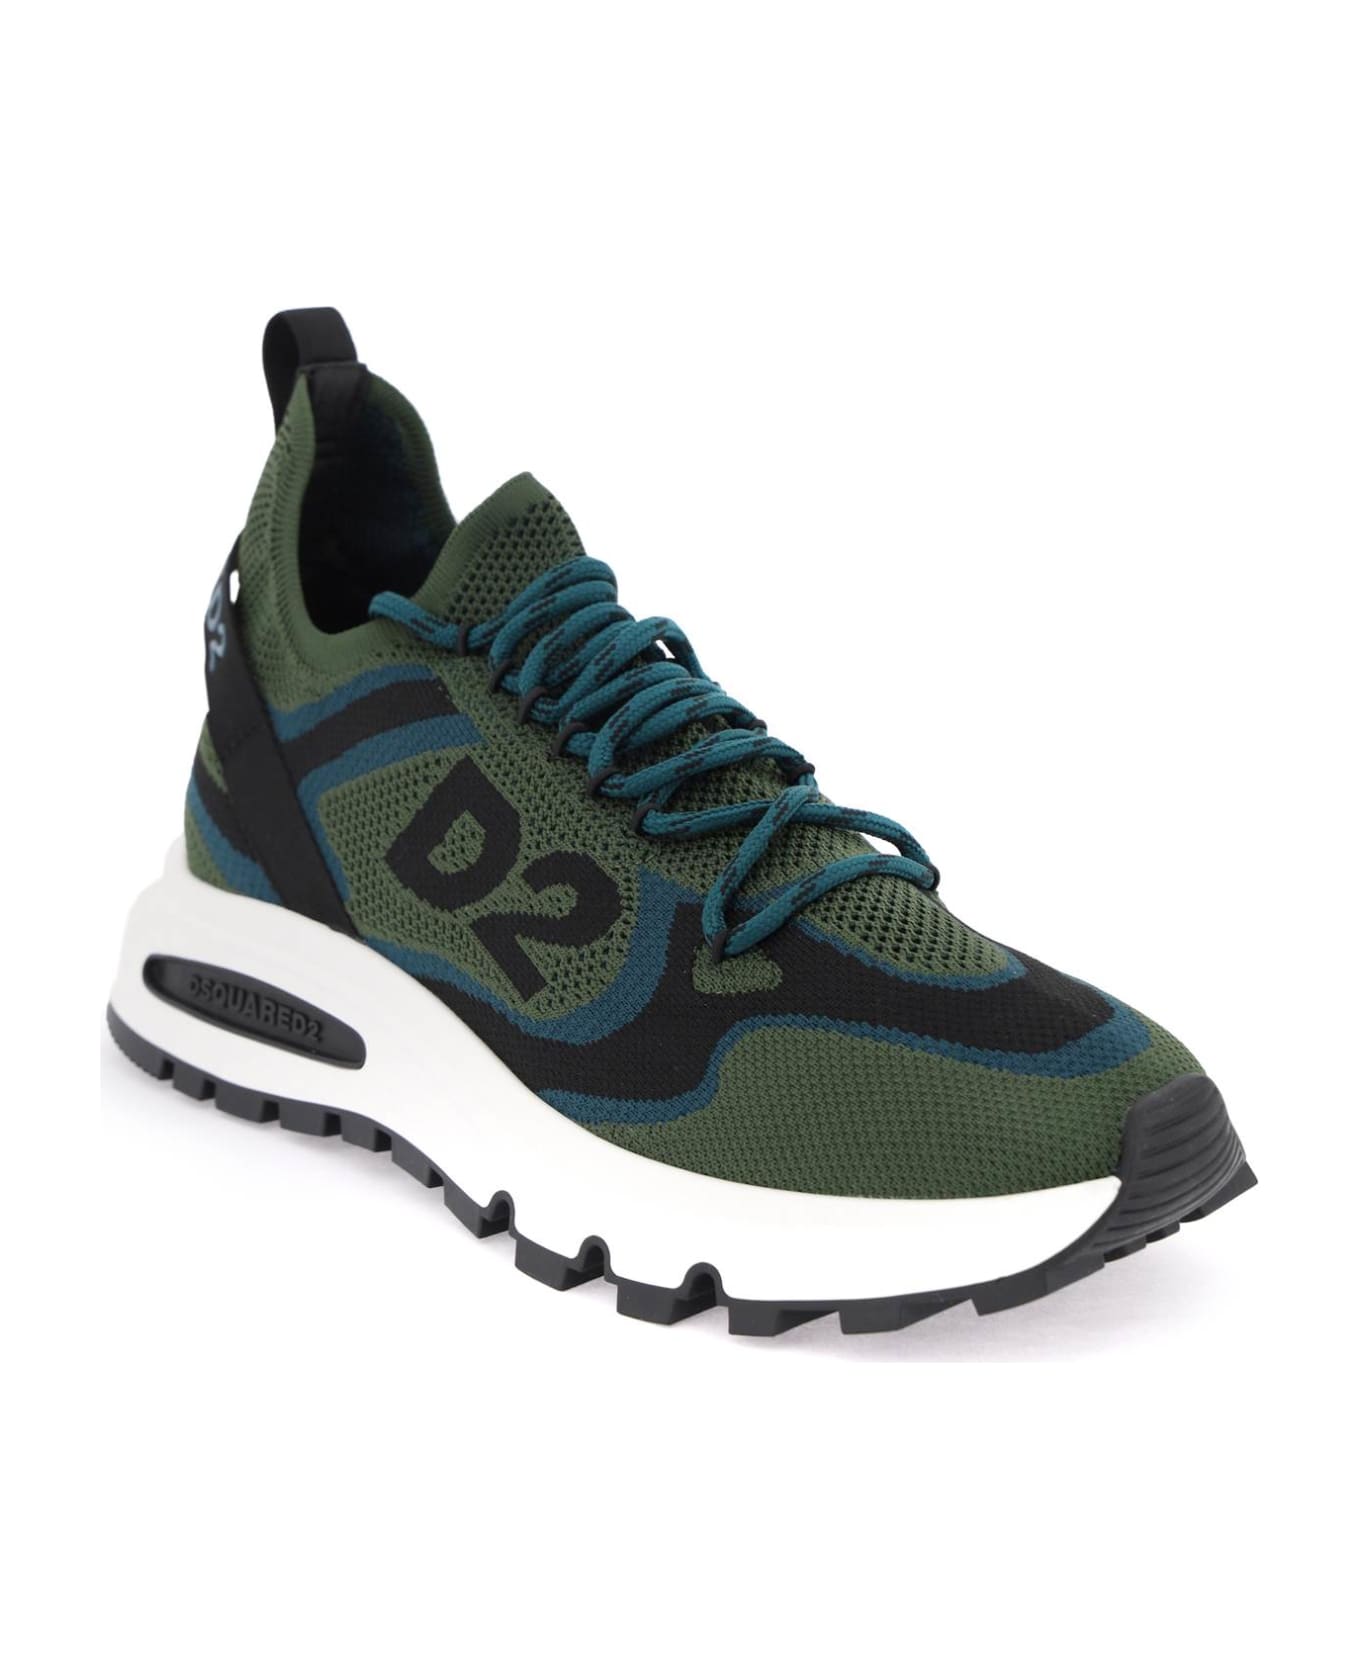 Dsquared2 Run Ds2 Sneakers - MILITARY TEAL BLACK (Black)